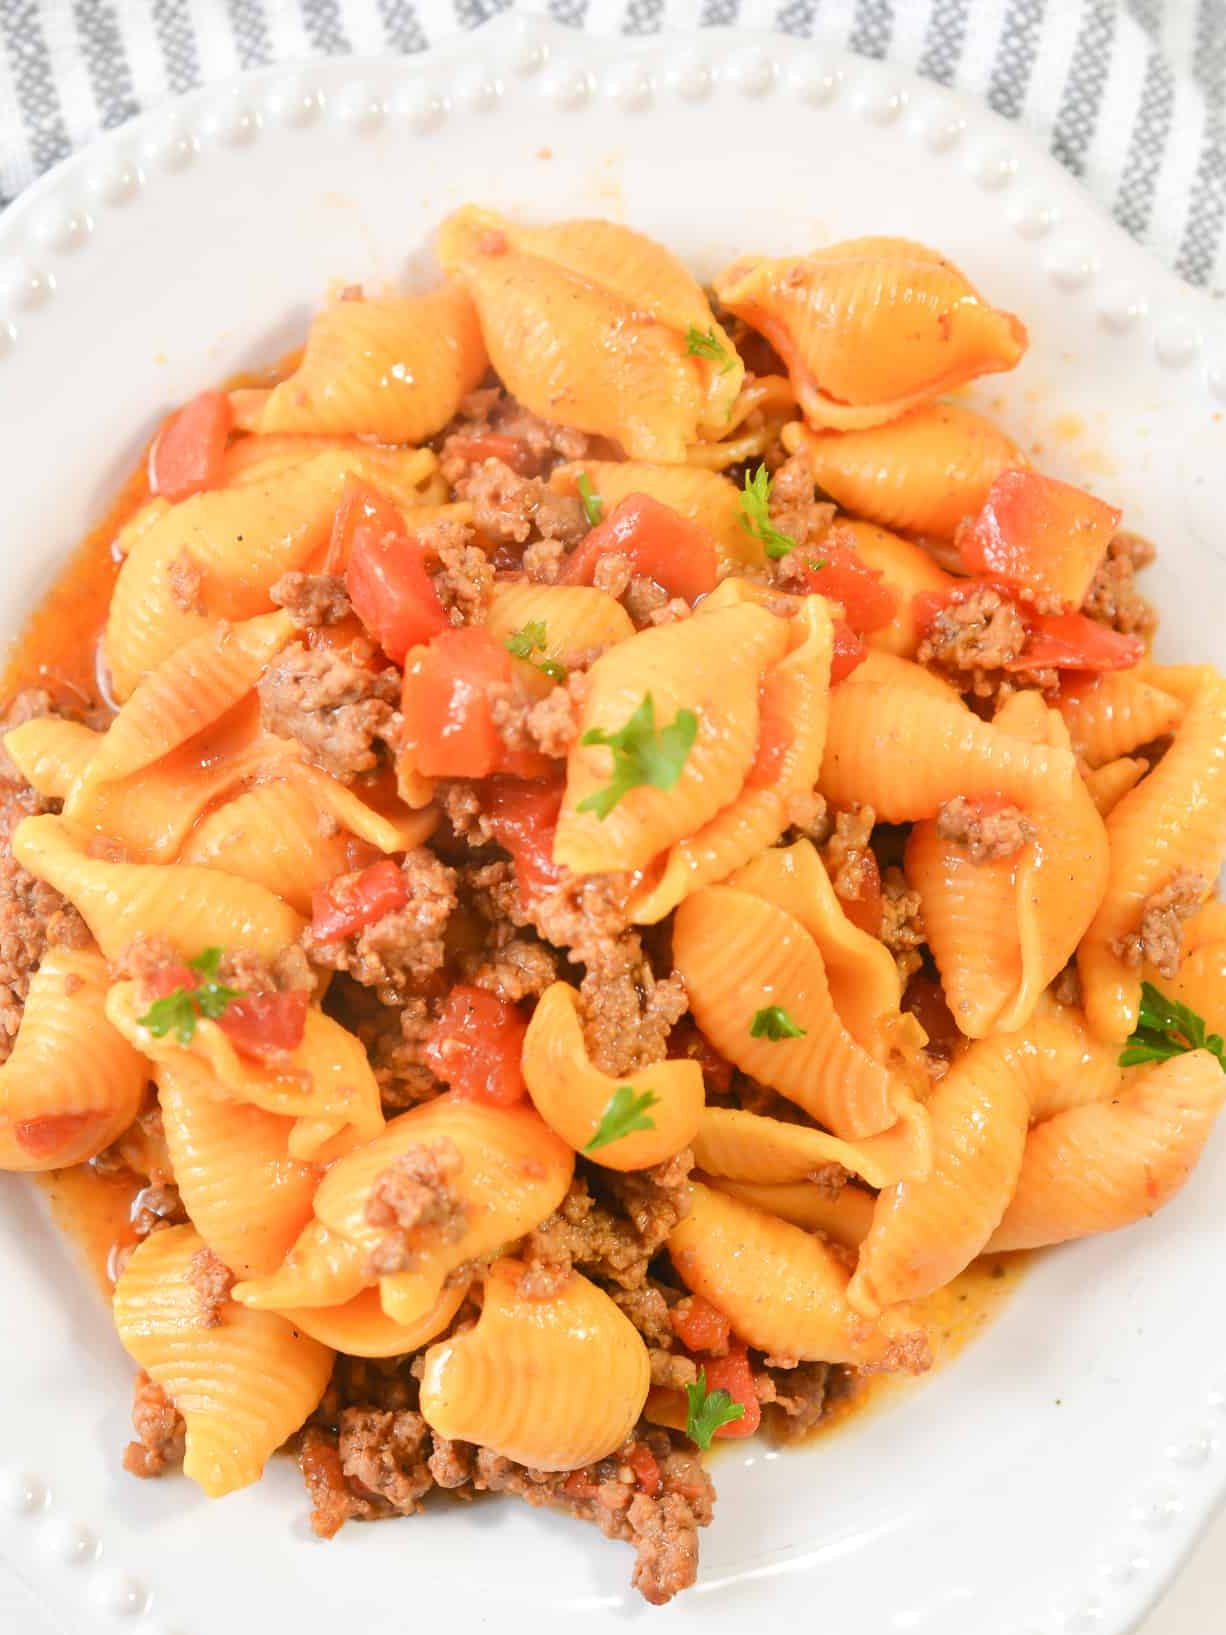 pasta recipes with ground beef, stuffed shells with ground beef, ground beef stuffed shells